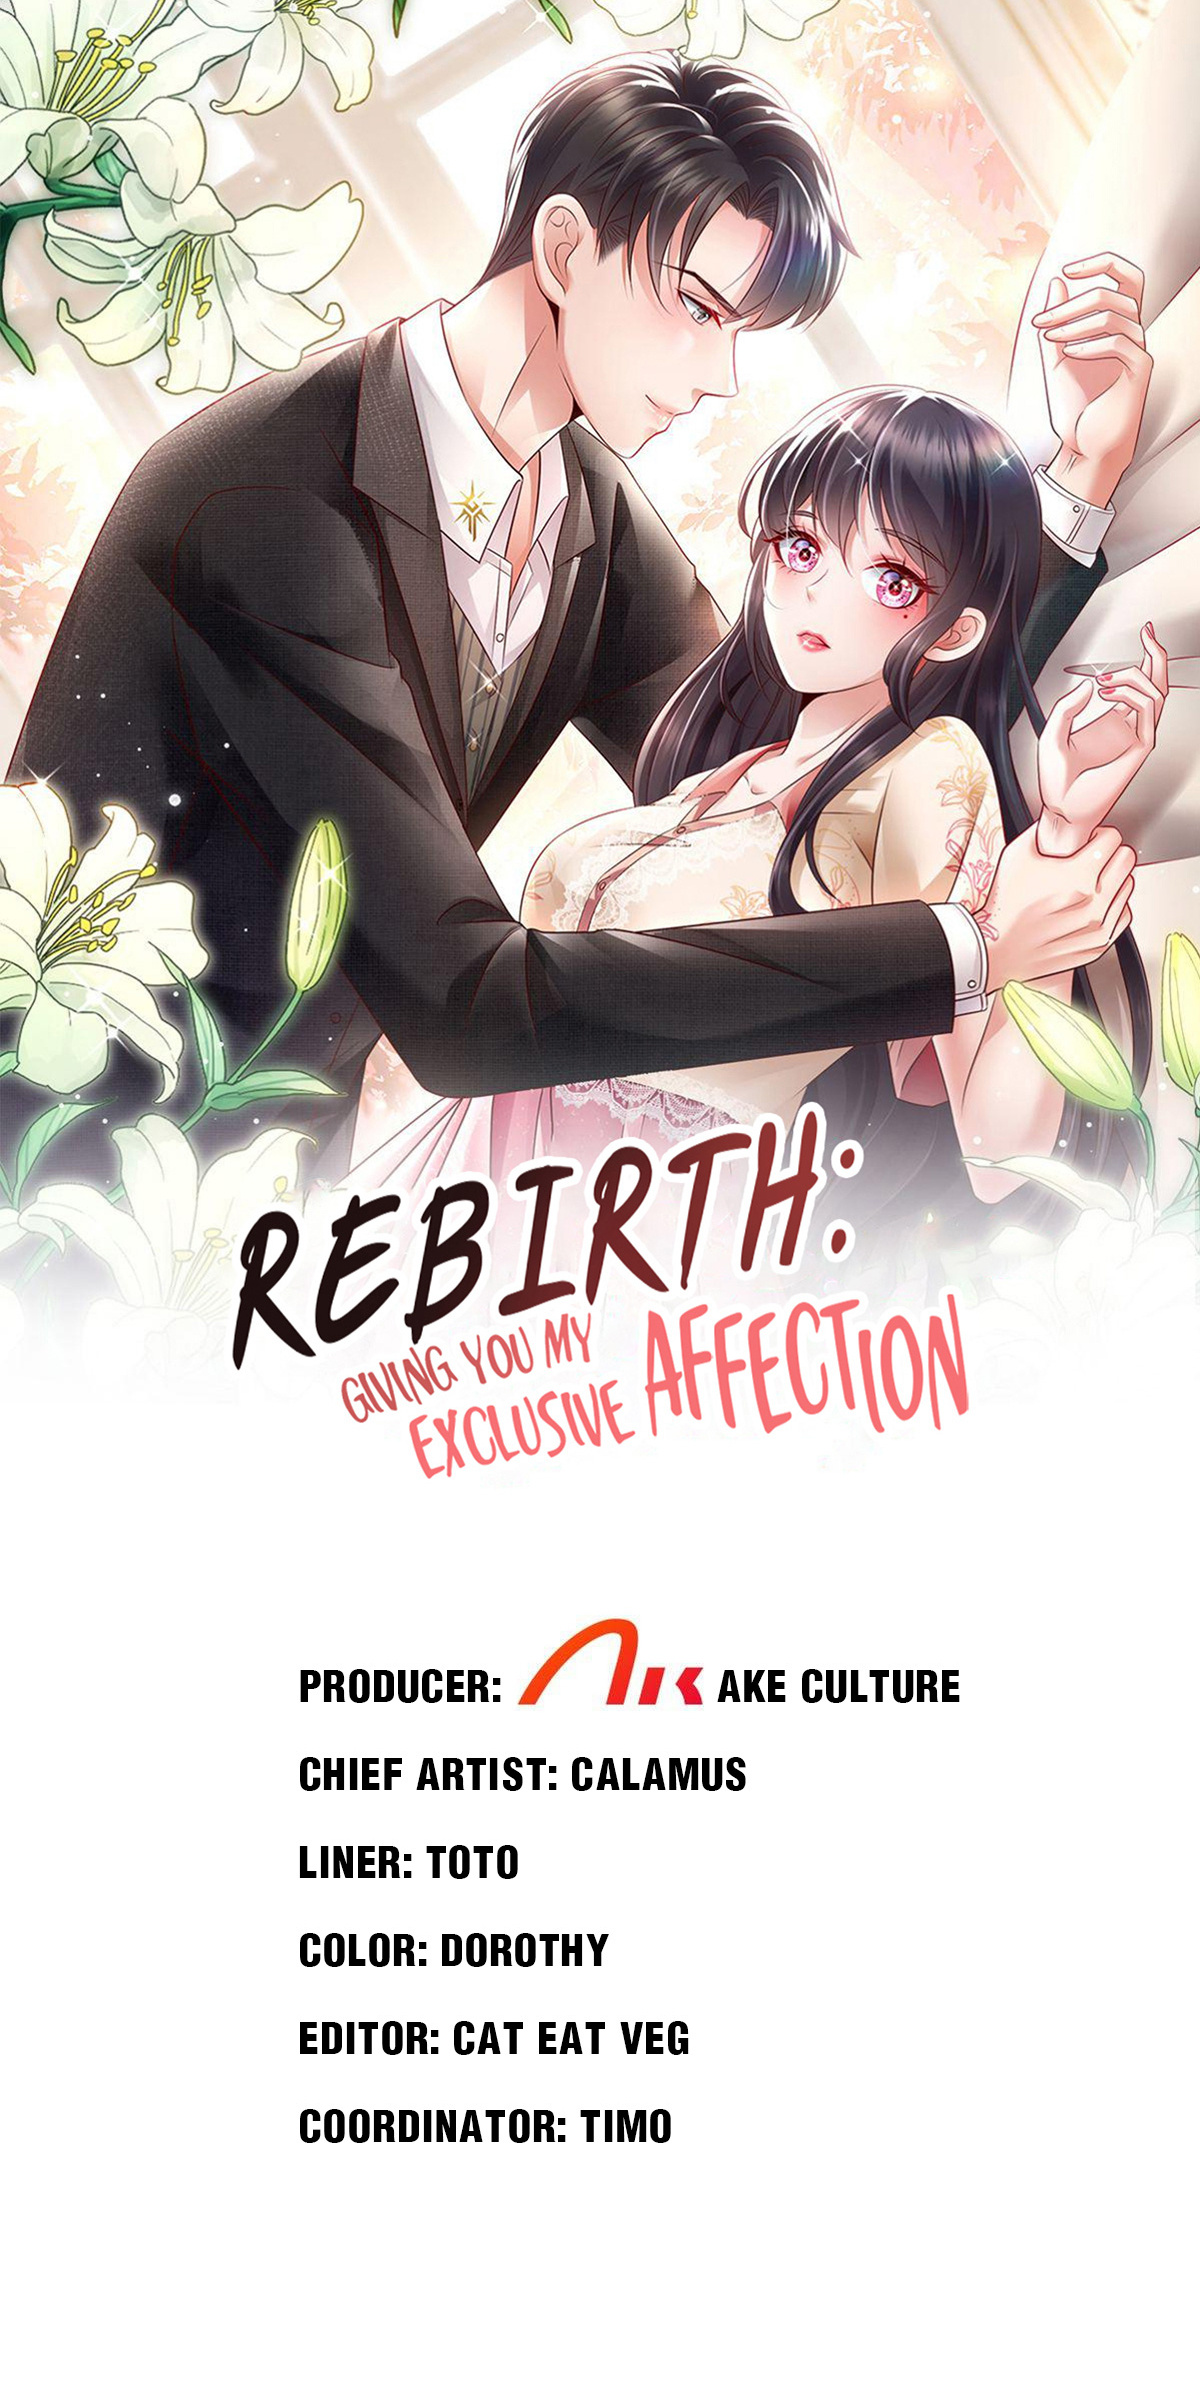 Rebirth: Giving You My Exclusive Affection 251